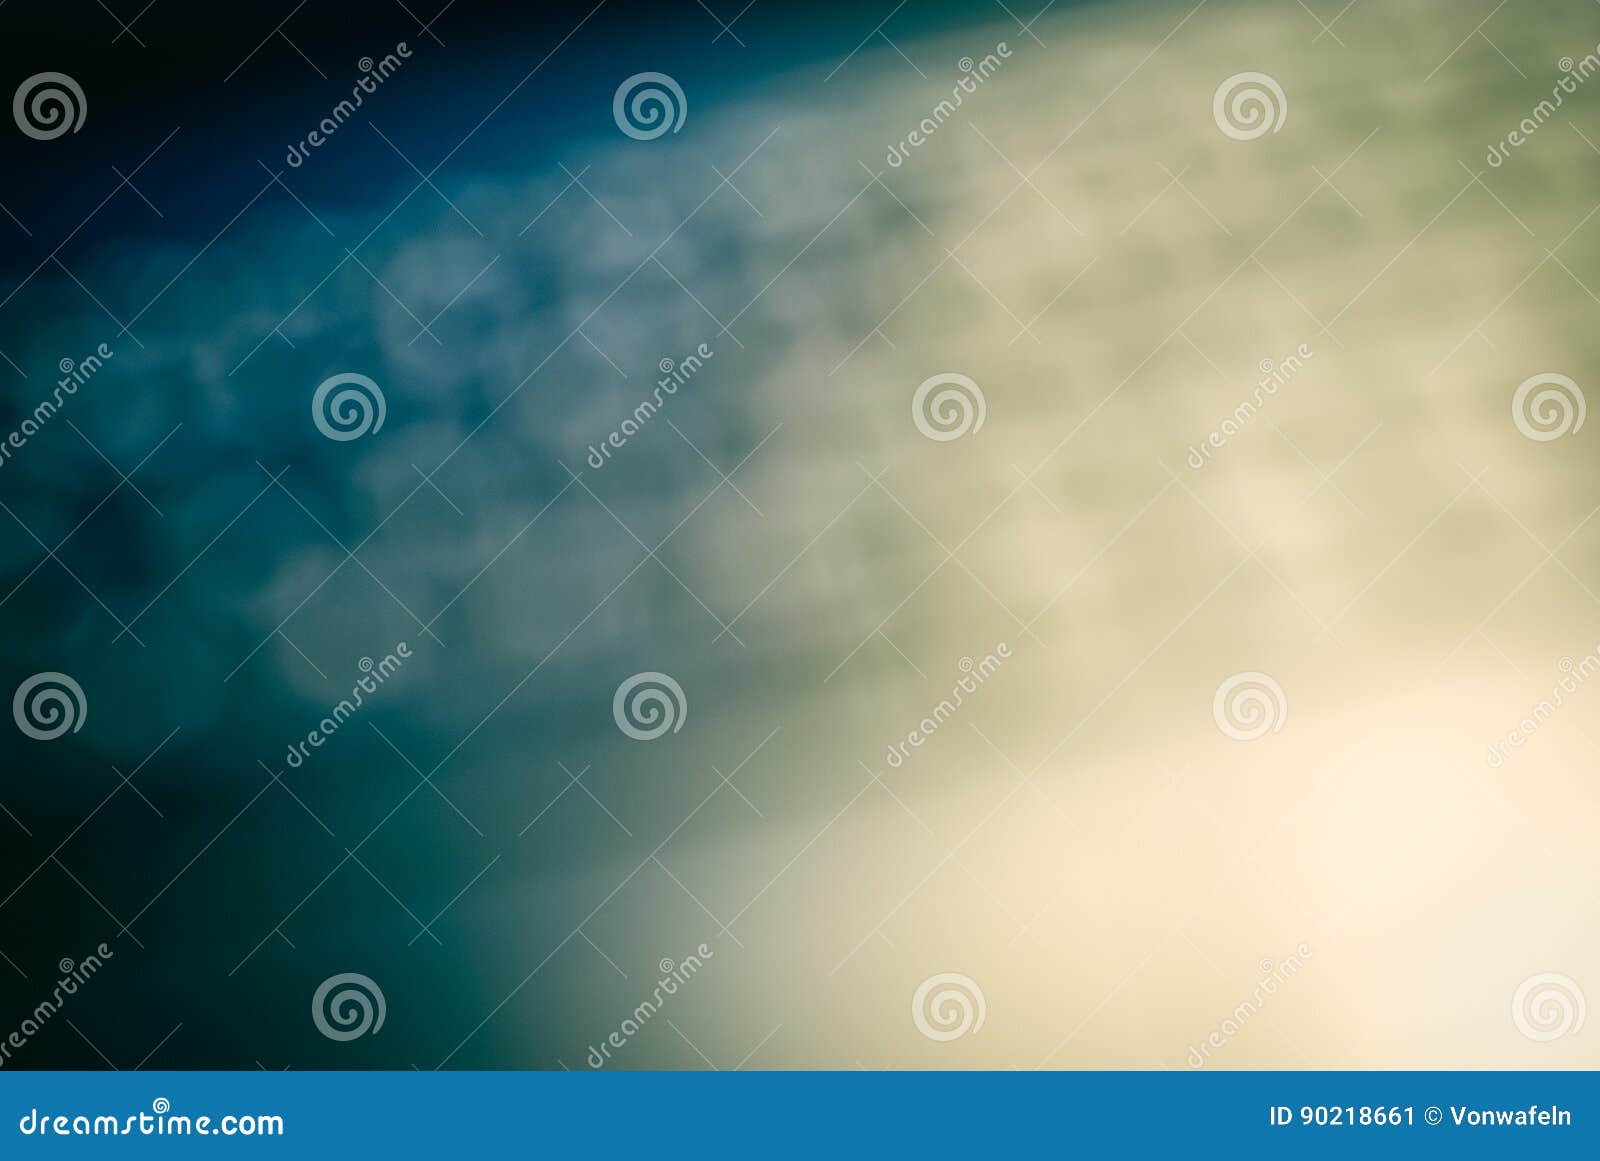 Abstract background stock image. Image of aesthetic, colors - 90218661